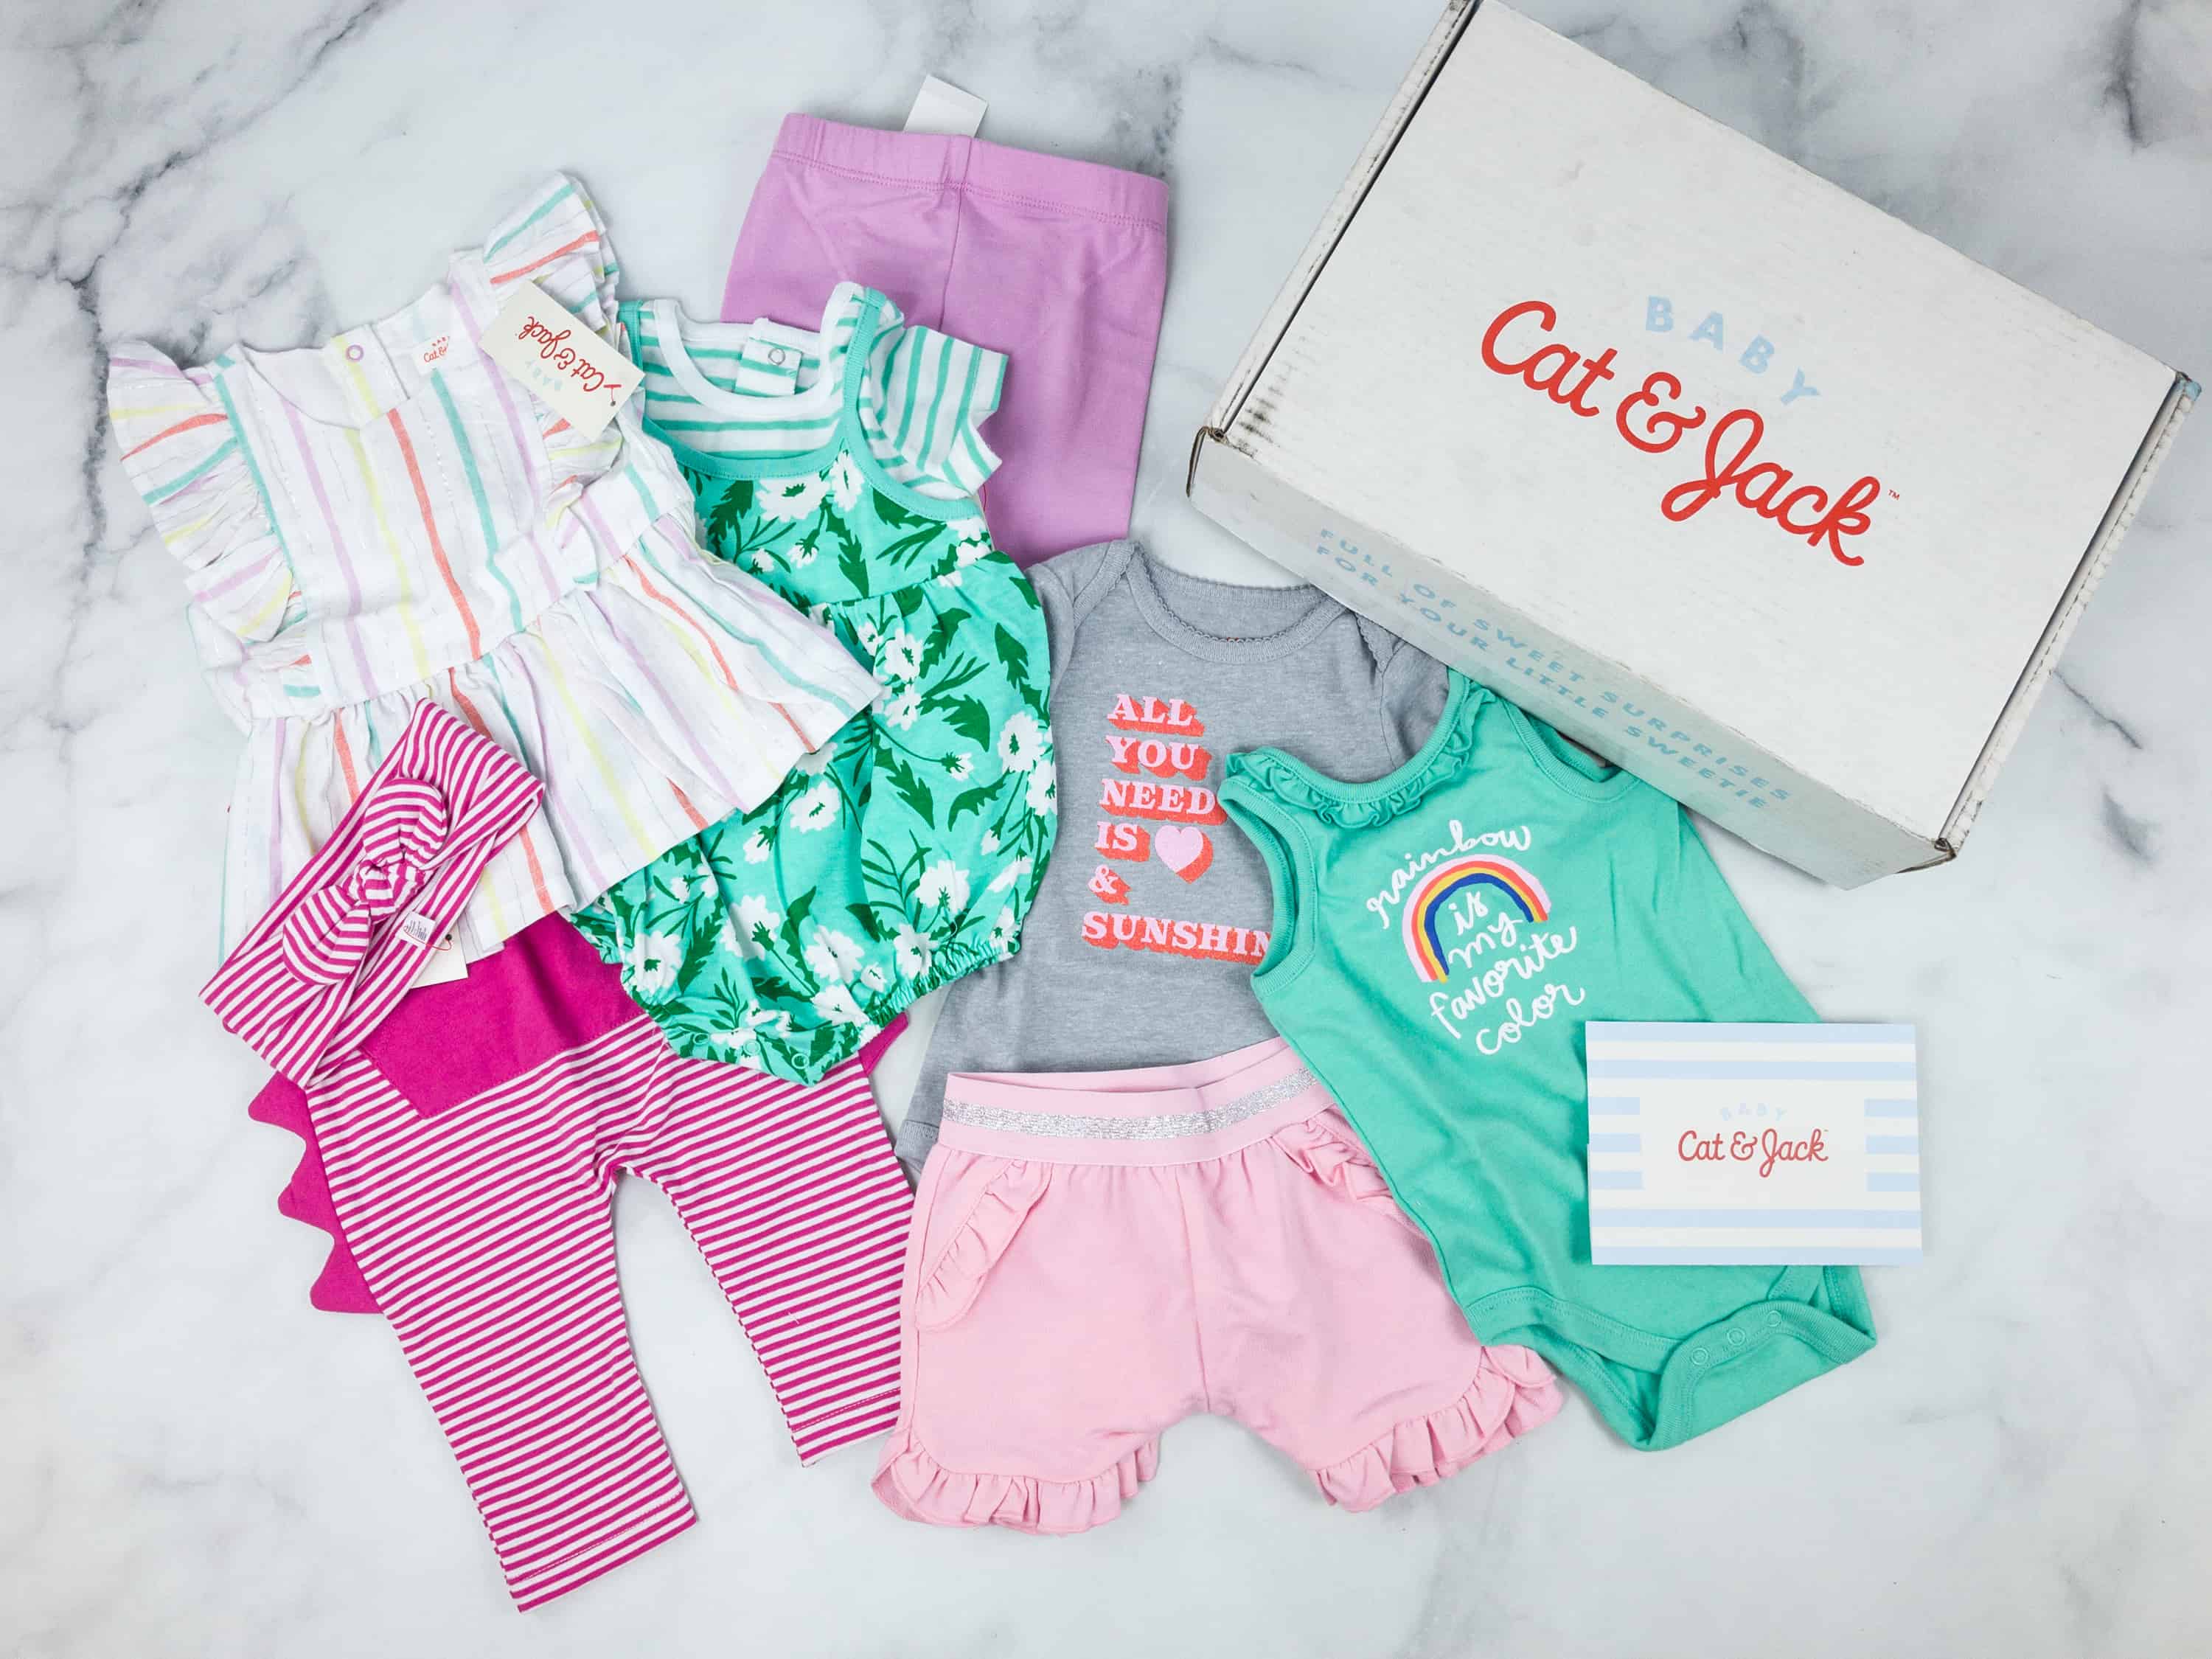 https://hellosubscription.com/wp-content/uploads/2018/05/25102514/cat-jack-baby-outfit-box-girls-spring-2018-7.jpg?quality=90&strip=all